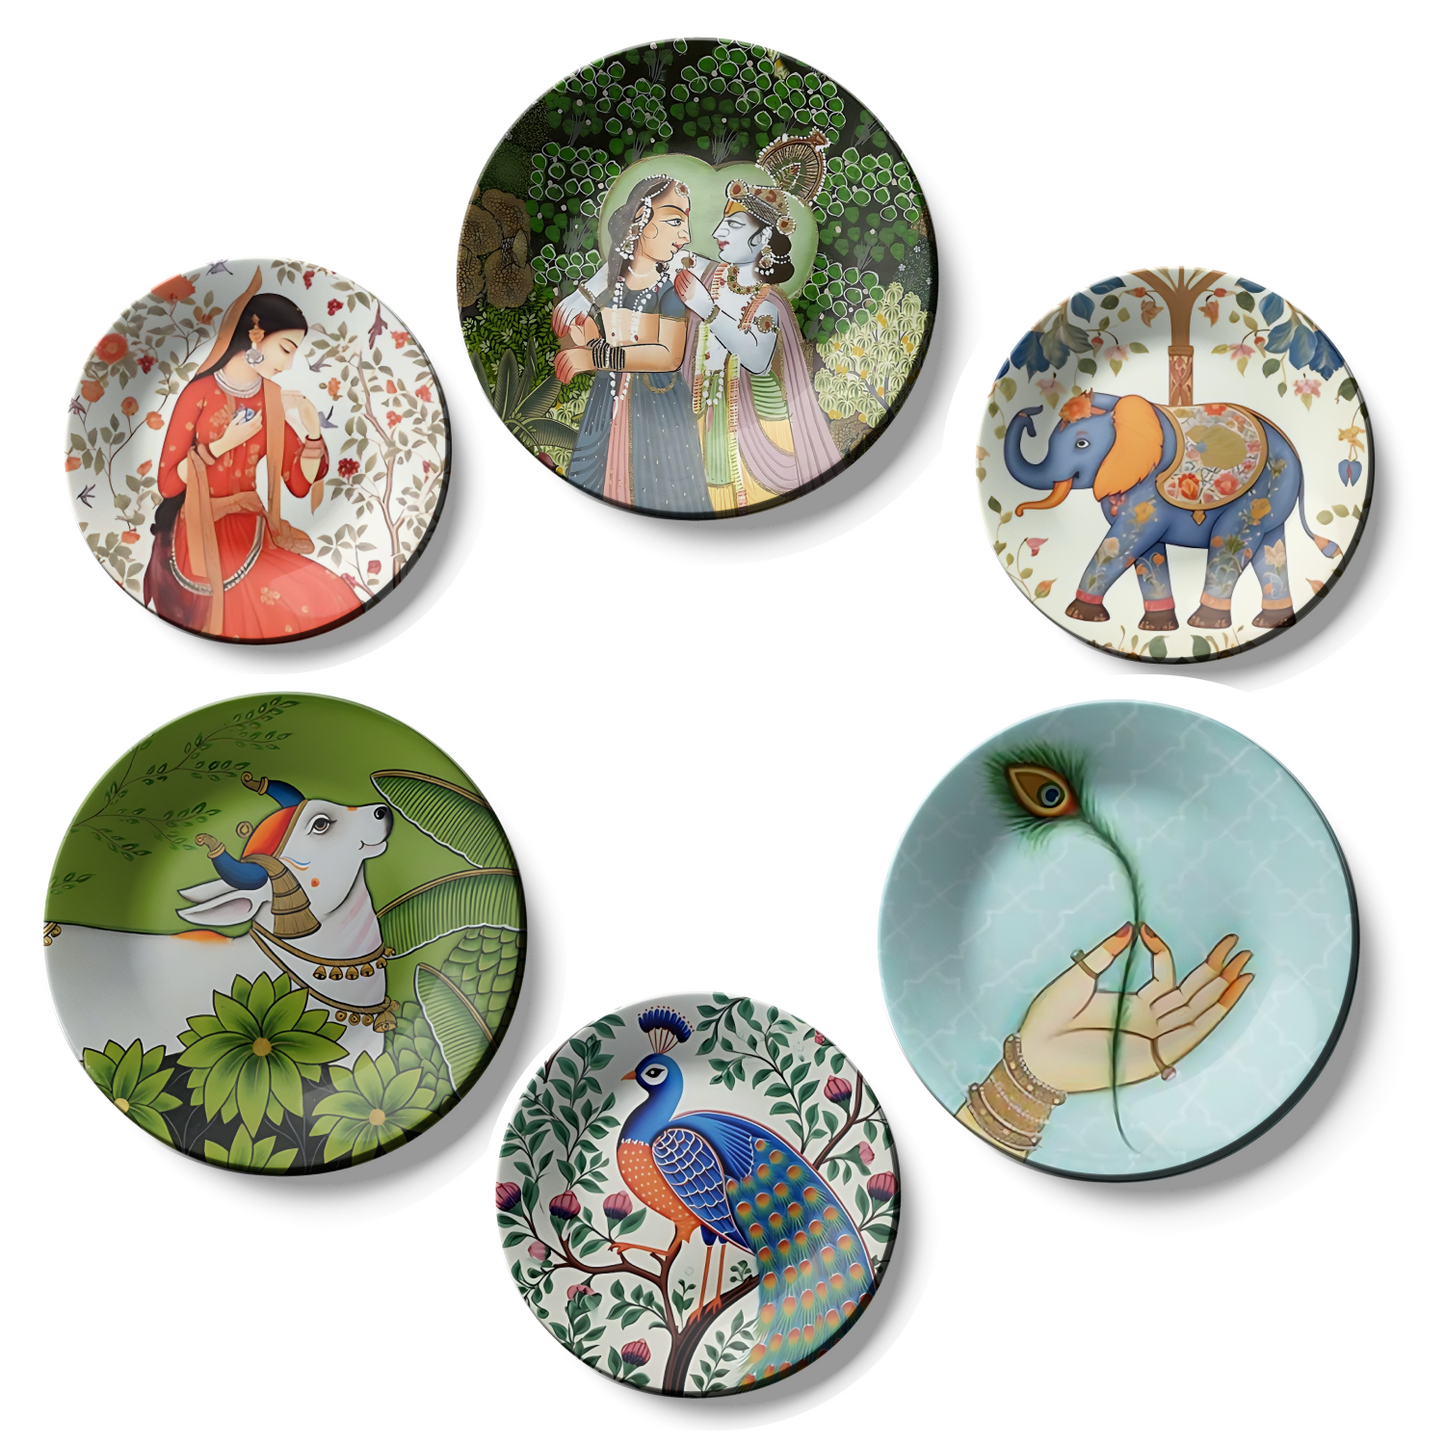 Mystical Journey Through Ancient India Wall Plates Collection for home decor